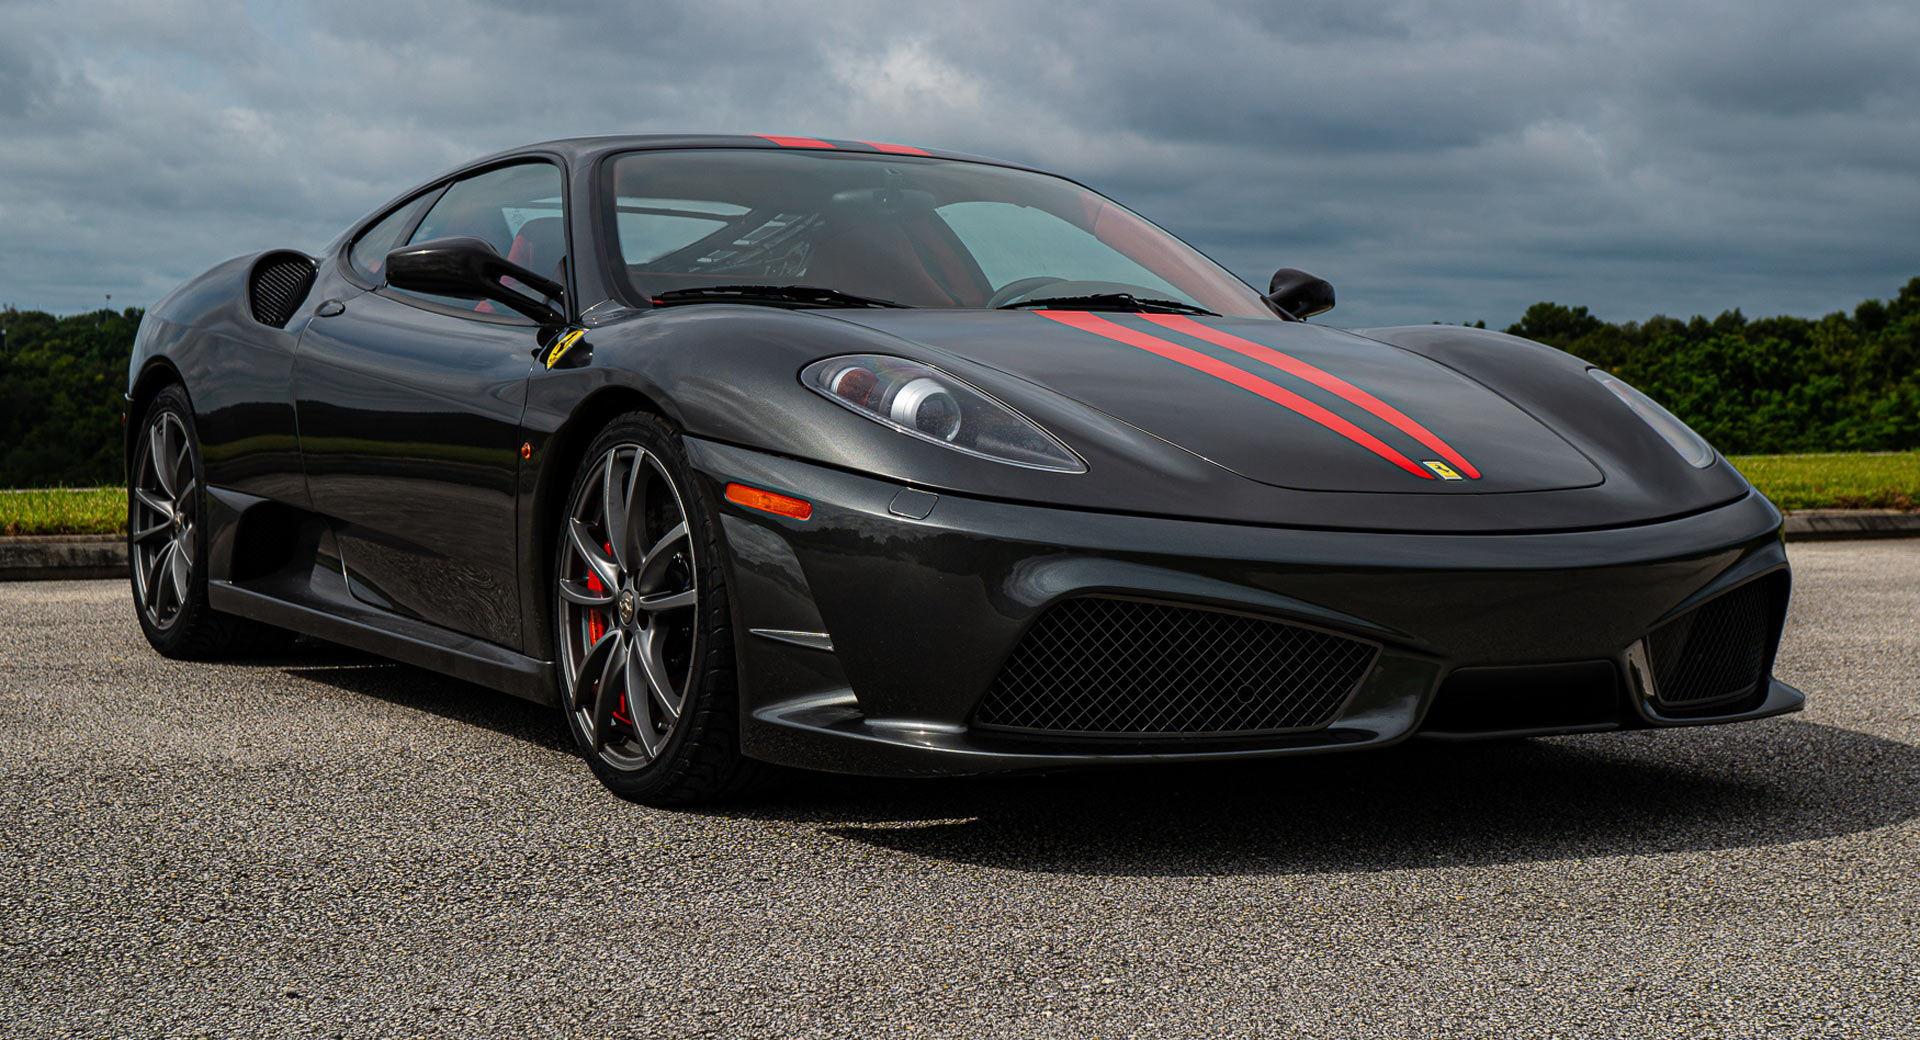 buy-this-low-mileage-ferrari-430-scuderia-live-happily-ever-after